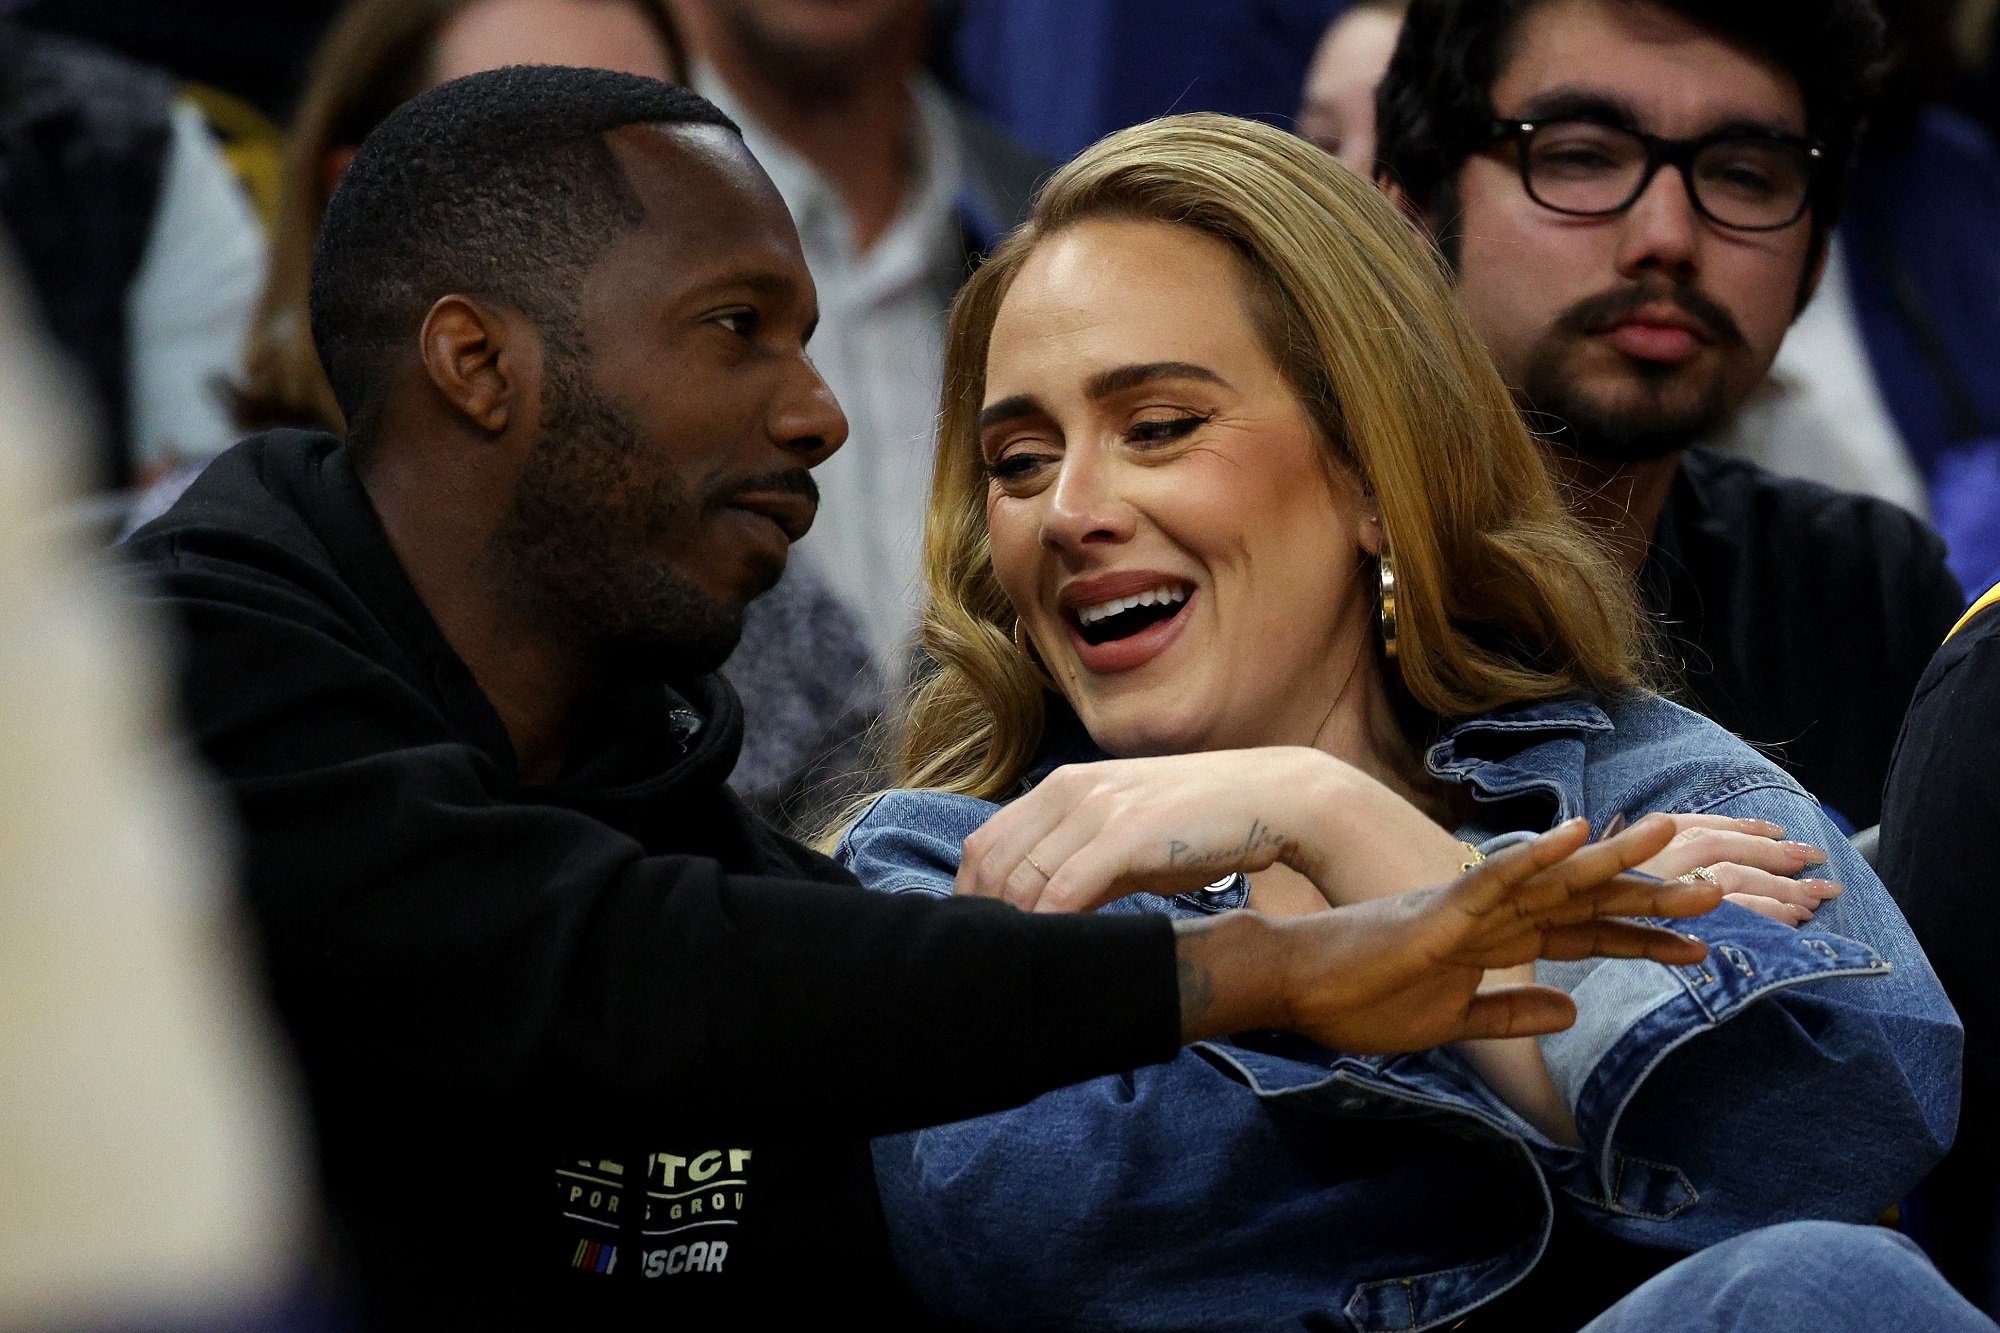 Rich Paul and Adele attend 2022 NBA Playoffs game between the Golden State Warriors and the Dallas Mavericks